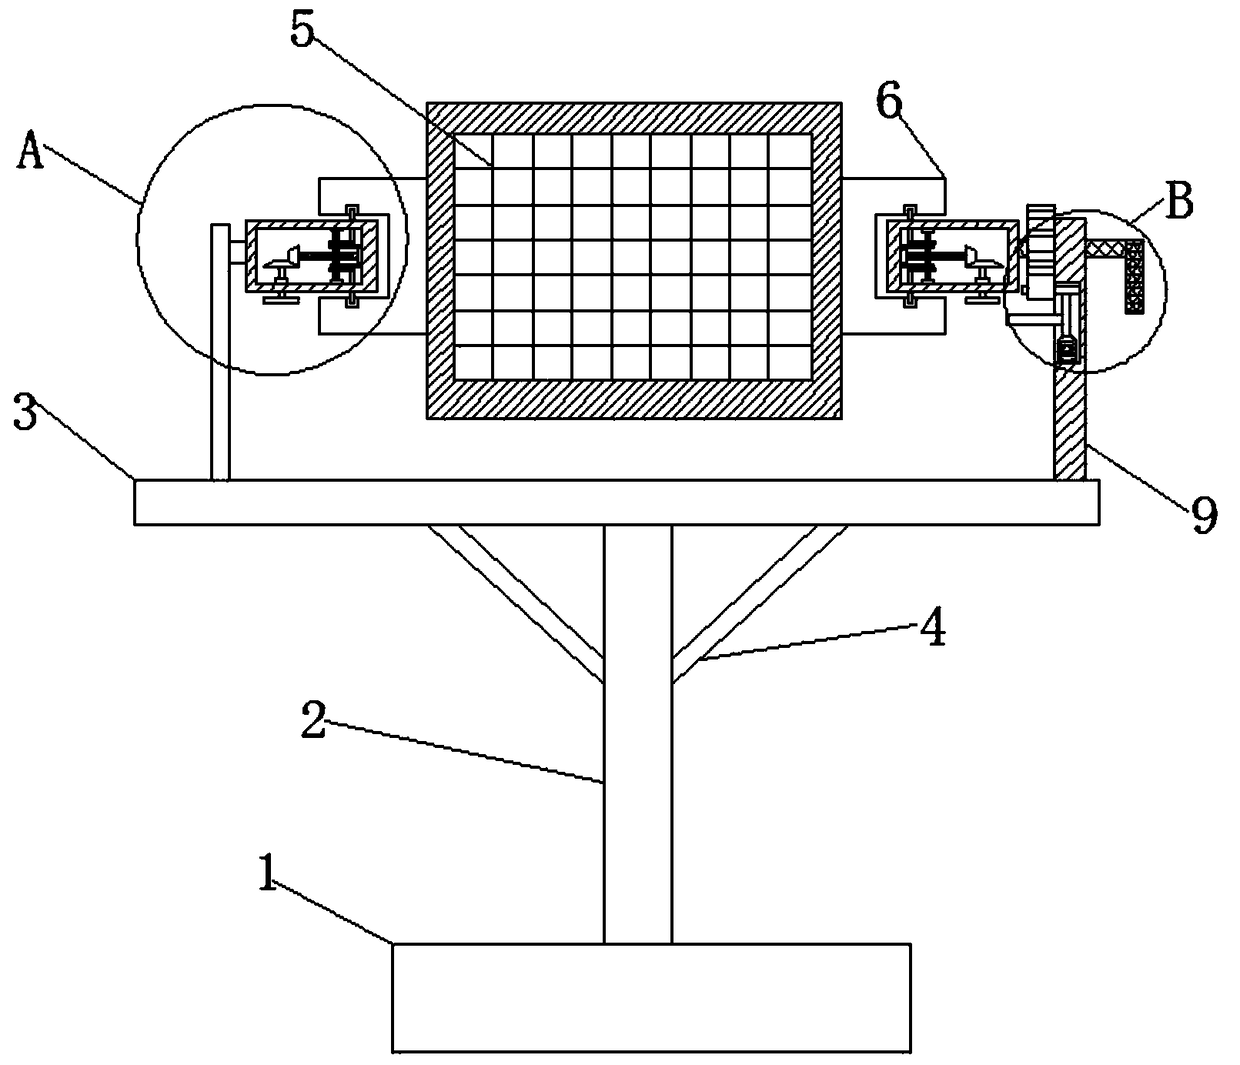 Photovoltaic power generation device convenient to install